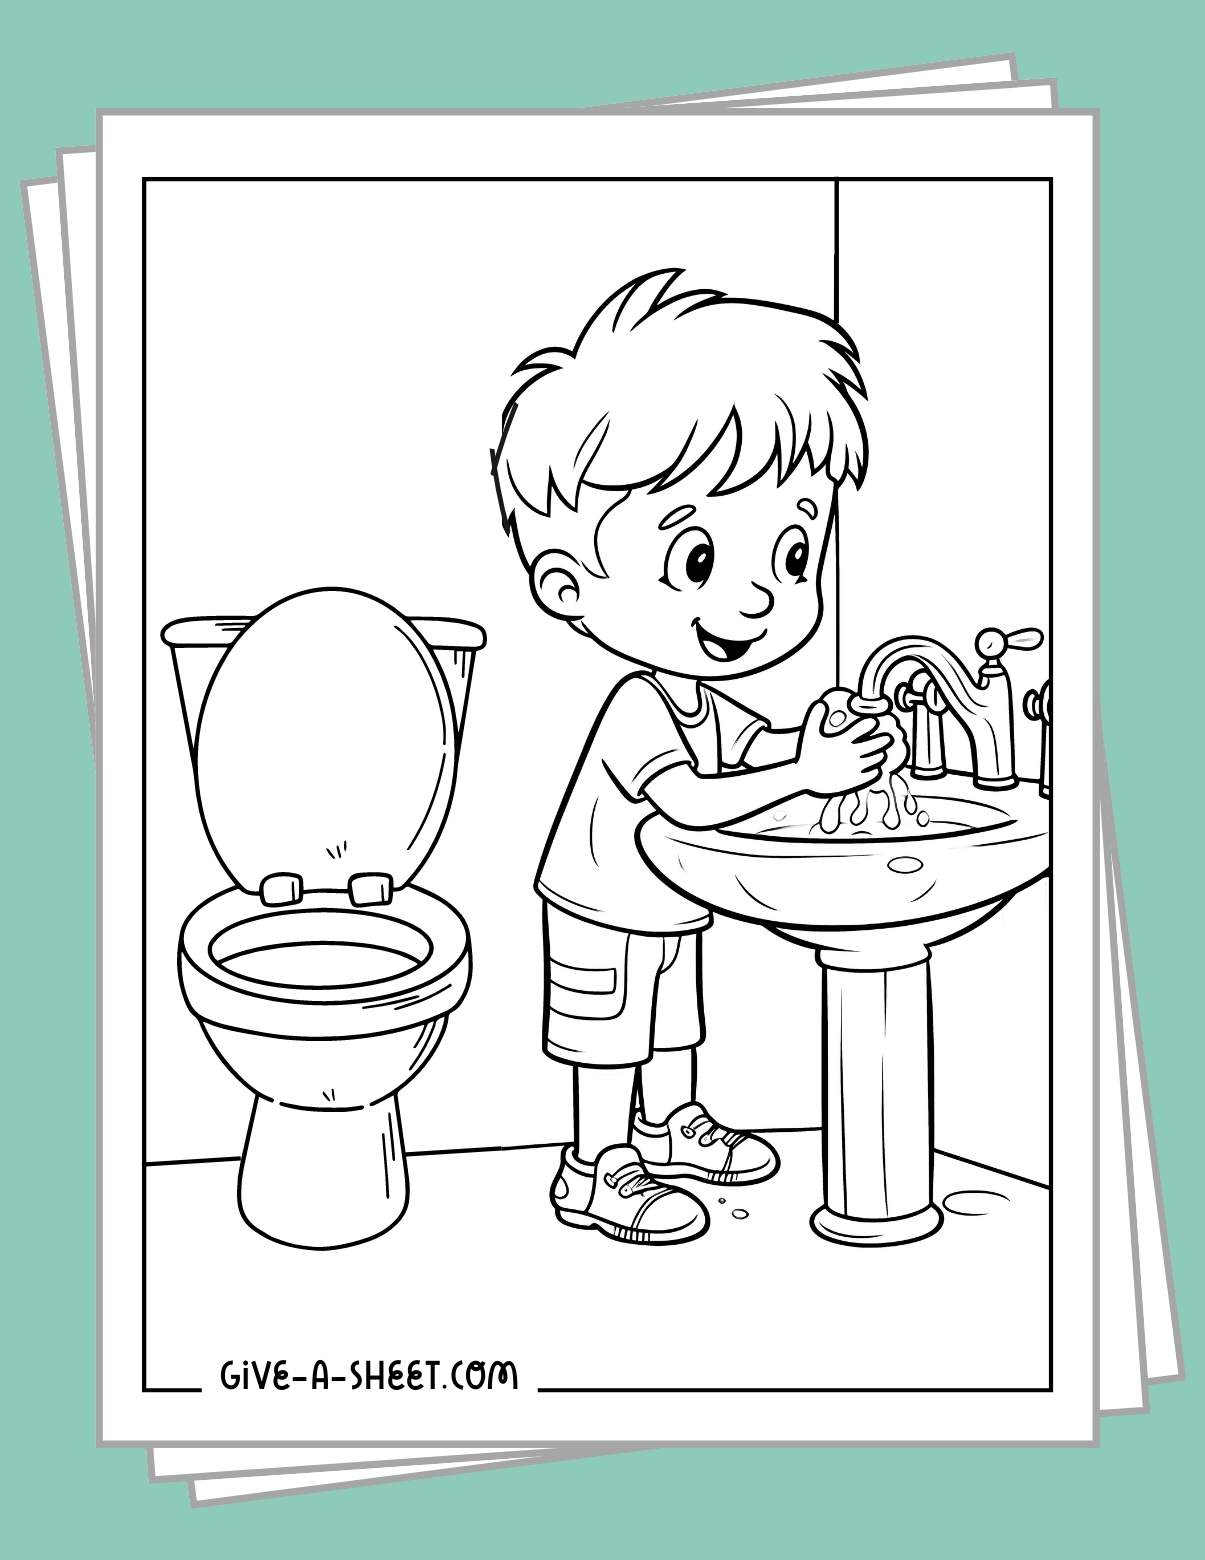 Printable potty training charts coloring pages.